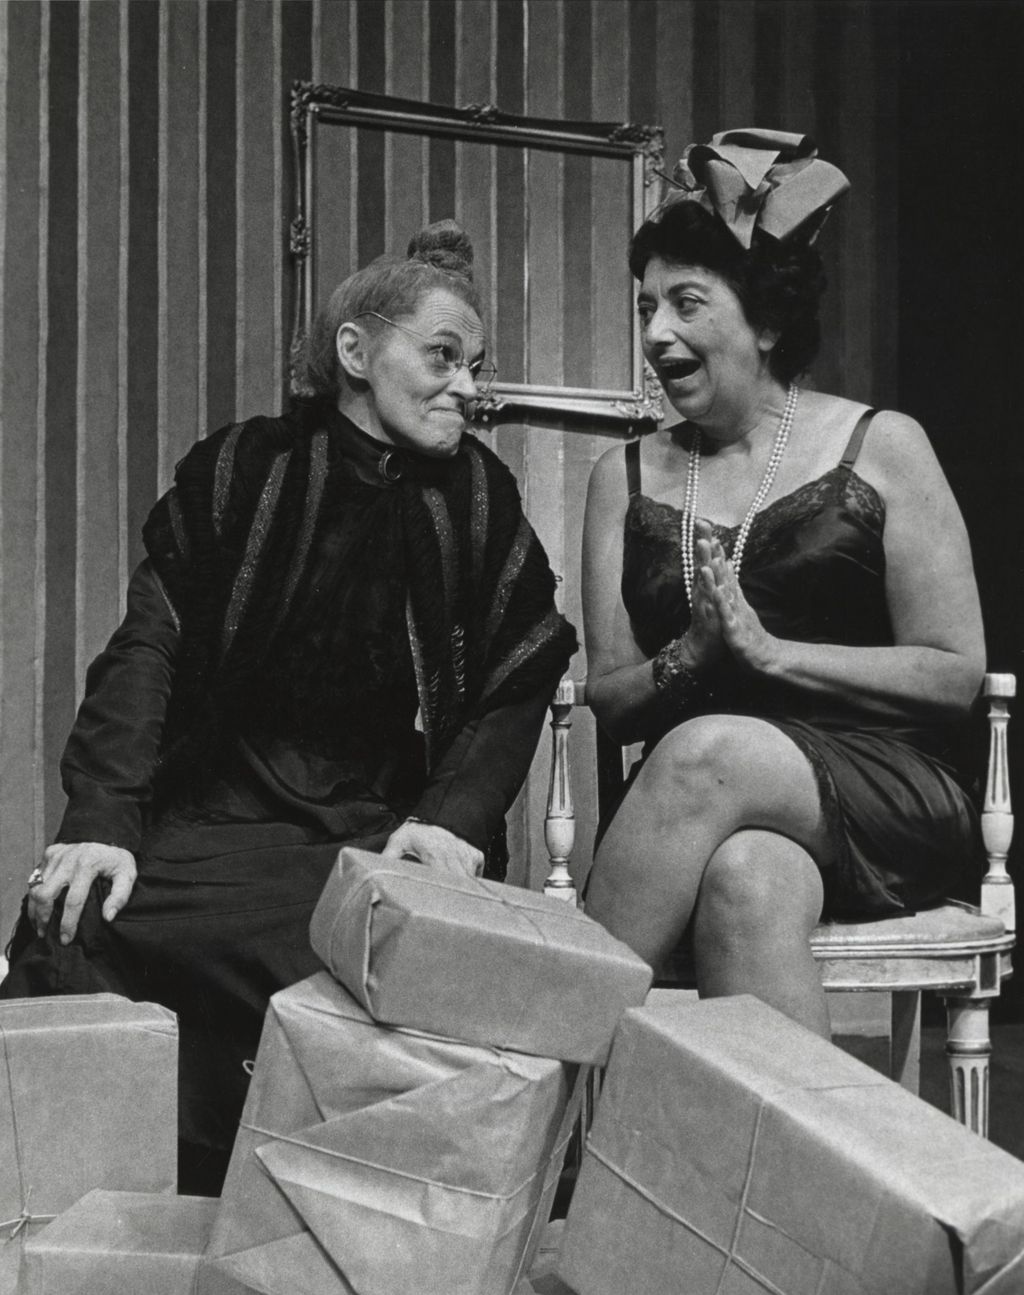 Beatrice Fredman and Tedra Klein on stage in production of "The American Dream" at Hull-House Theater